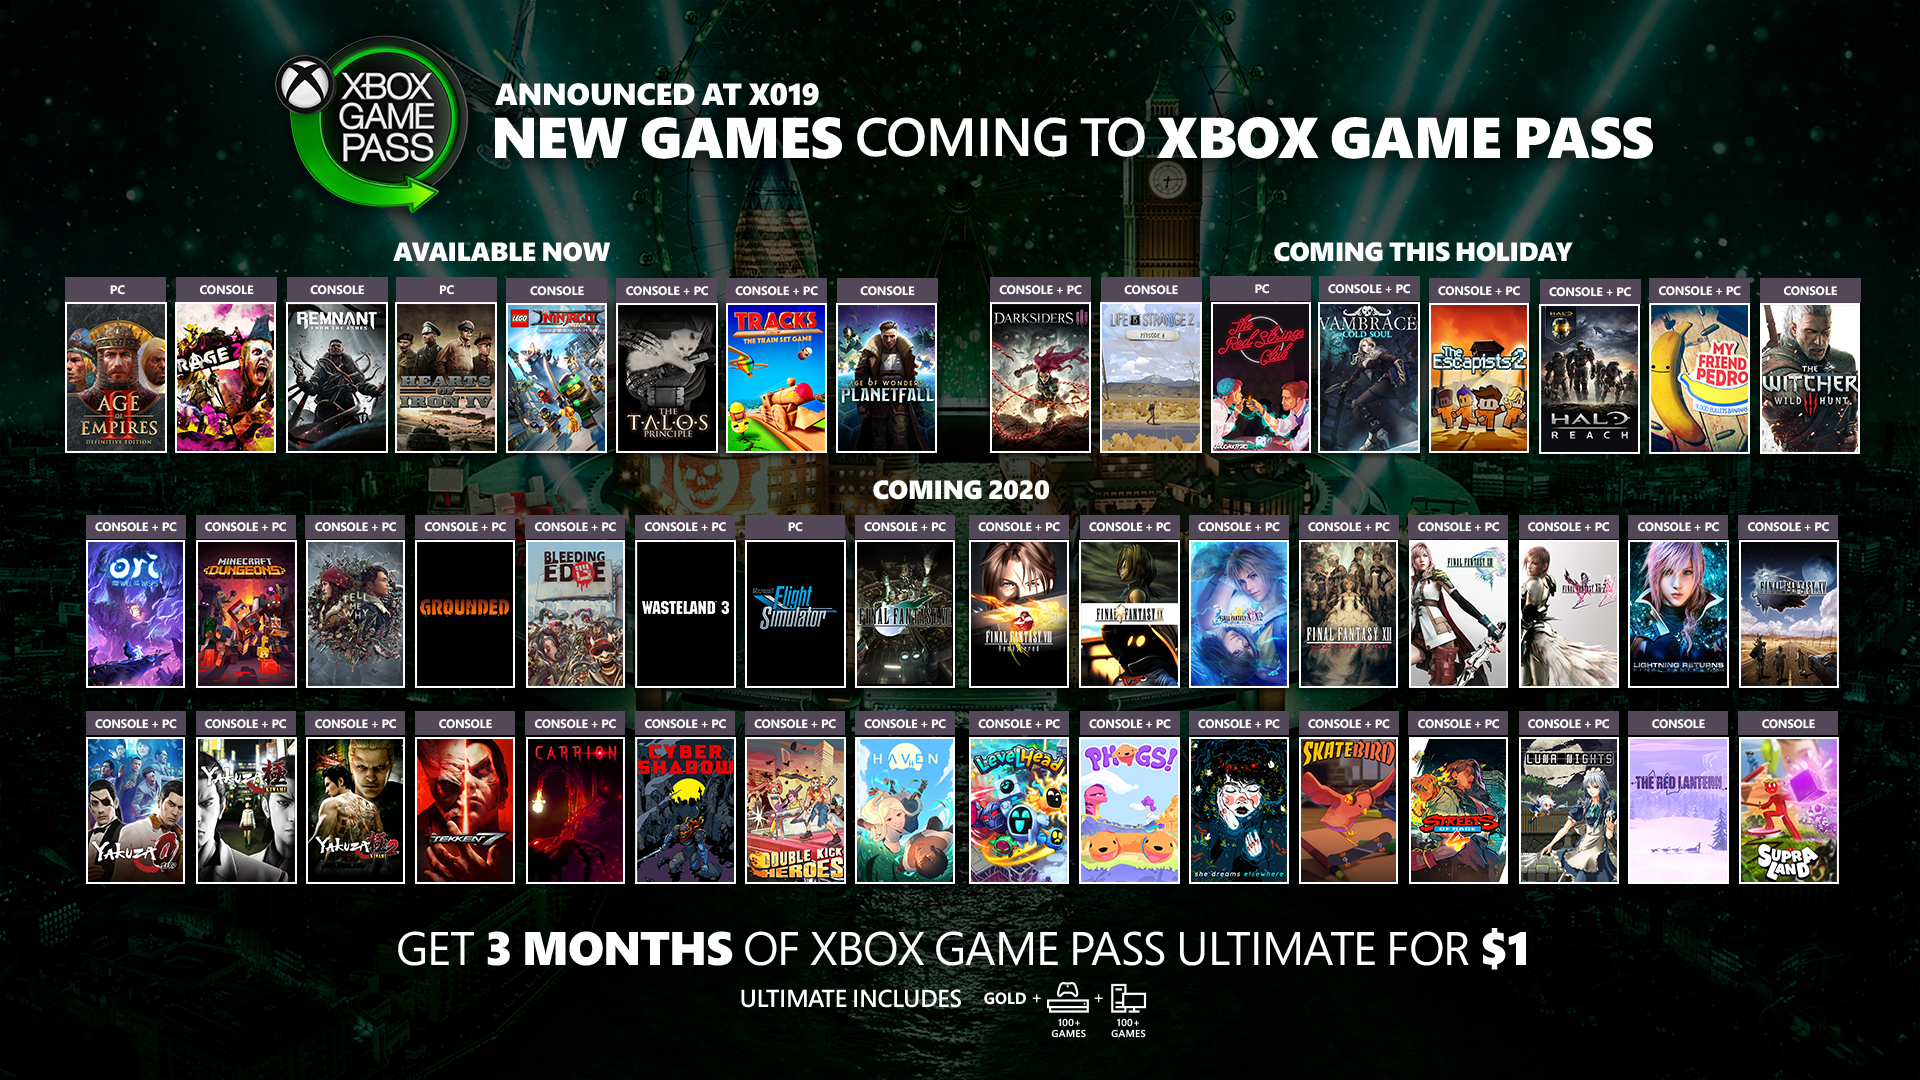 Xbox Game Pass At X019 Announcing Over 50 New Games And Ultimate 